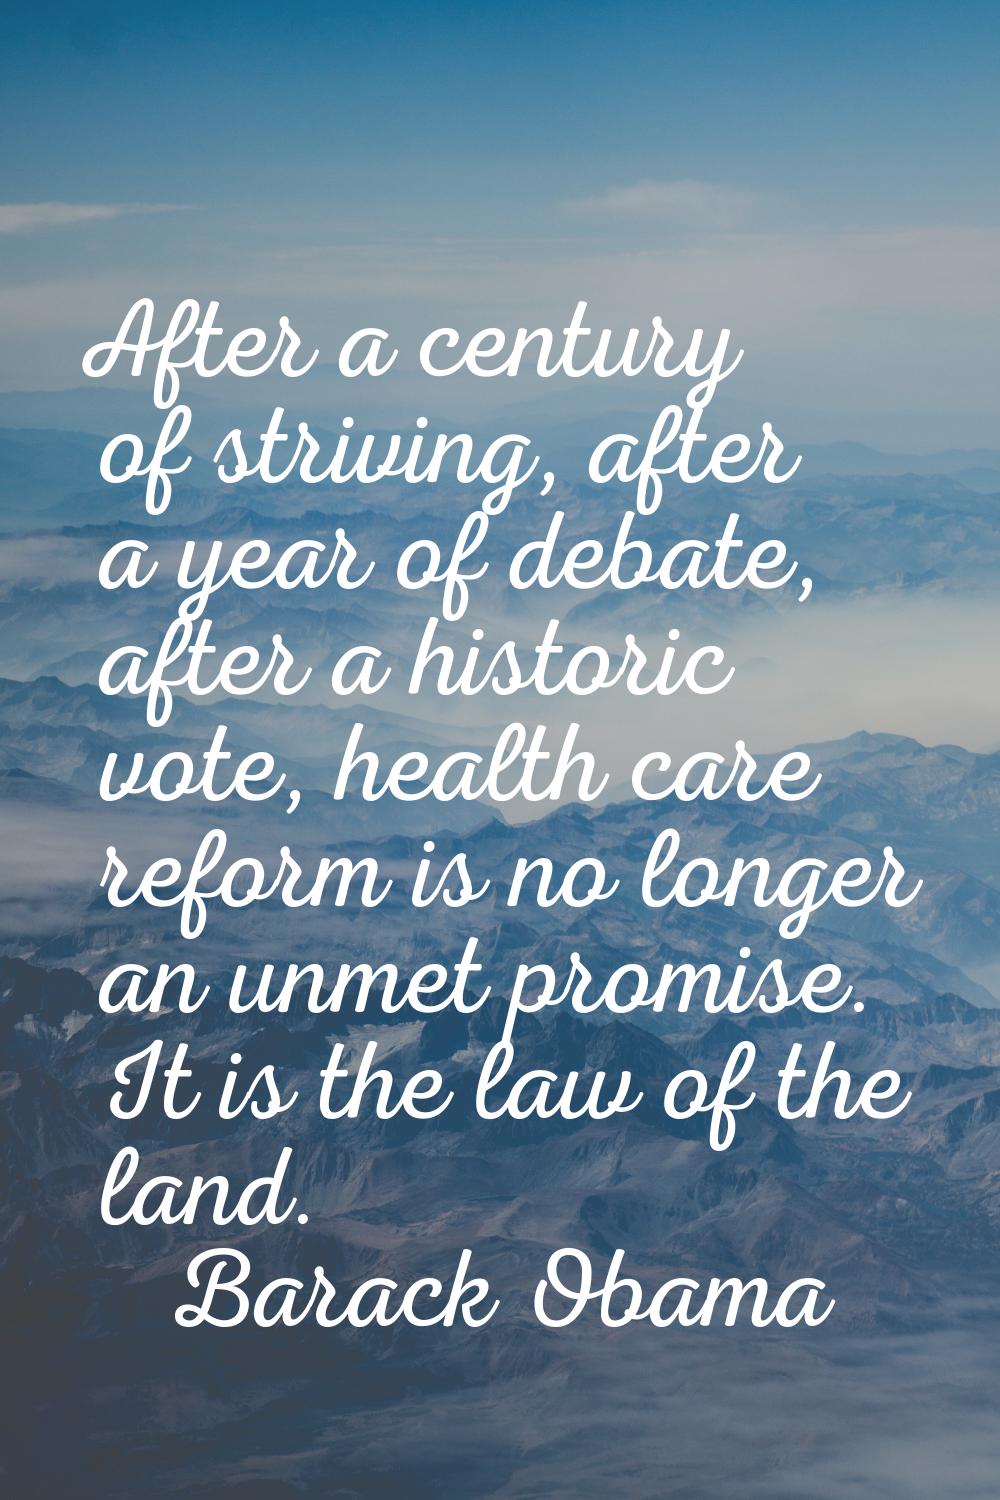 After a century of striving, after a year of debate, after a historic vote, health care reform is n